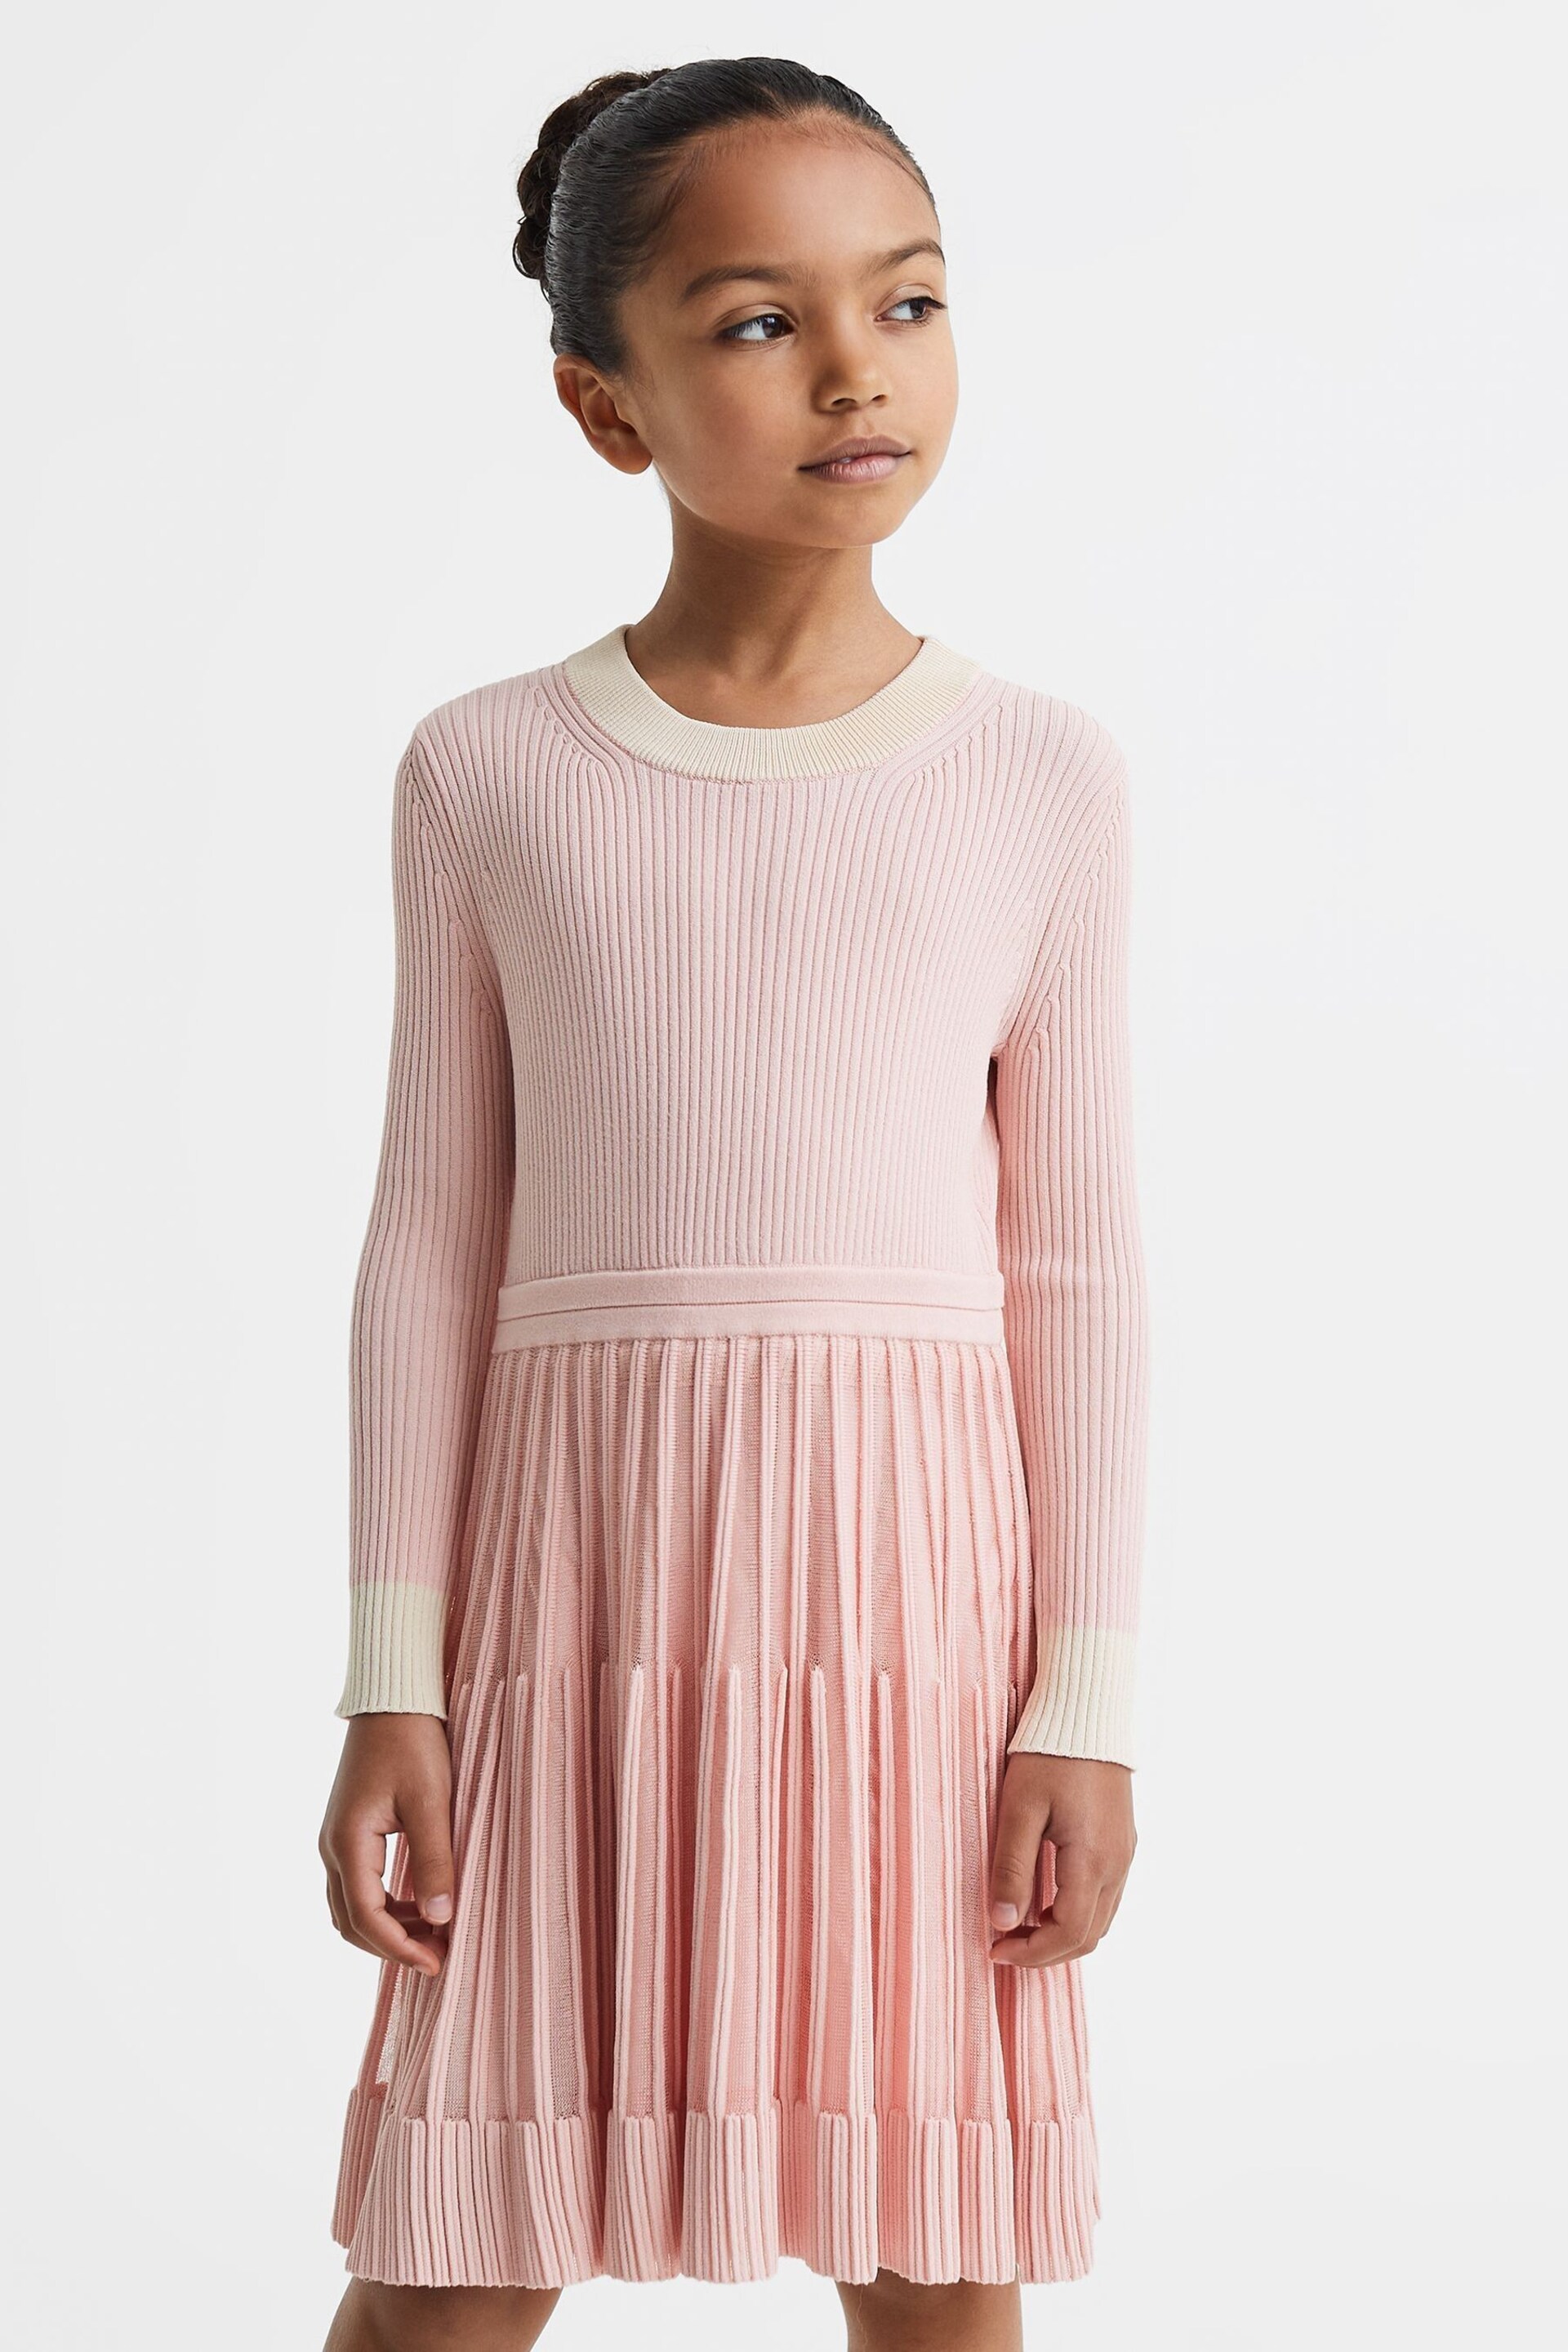 Reiss Pink Teagan Teen Ribbed Fit-and-Flare Dress - Image 3 of 6